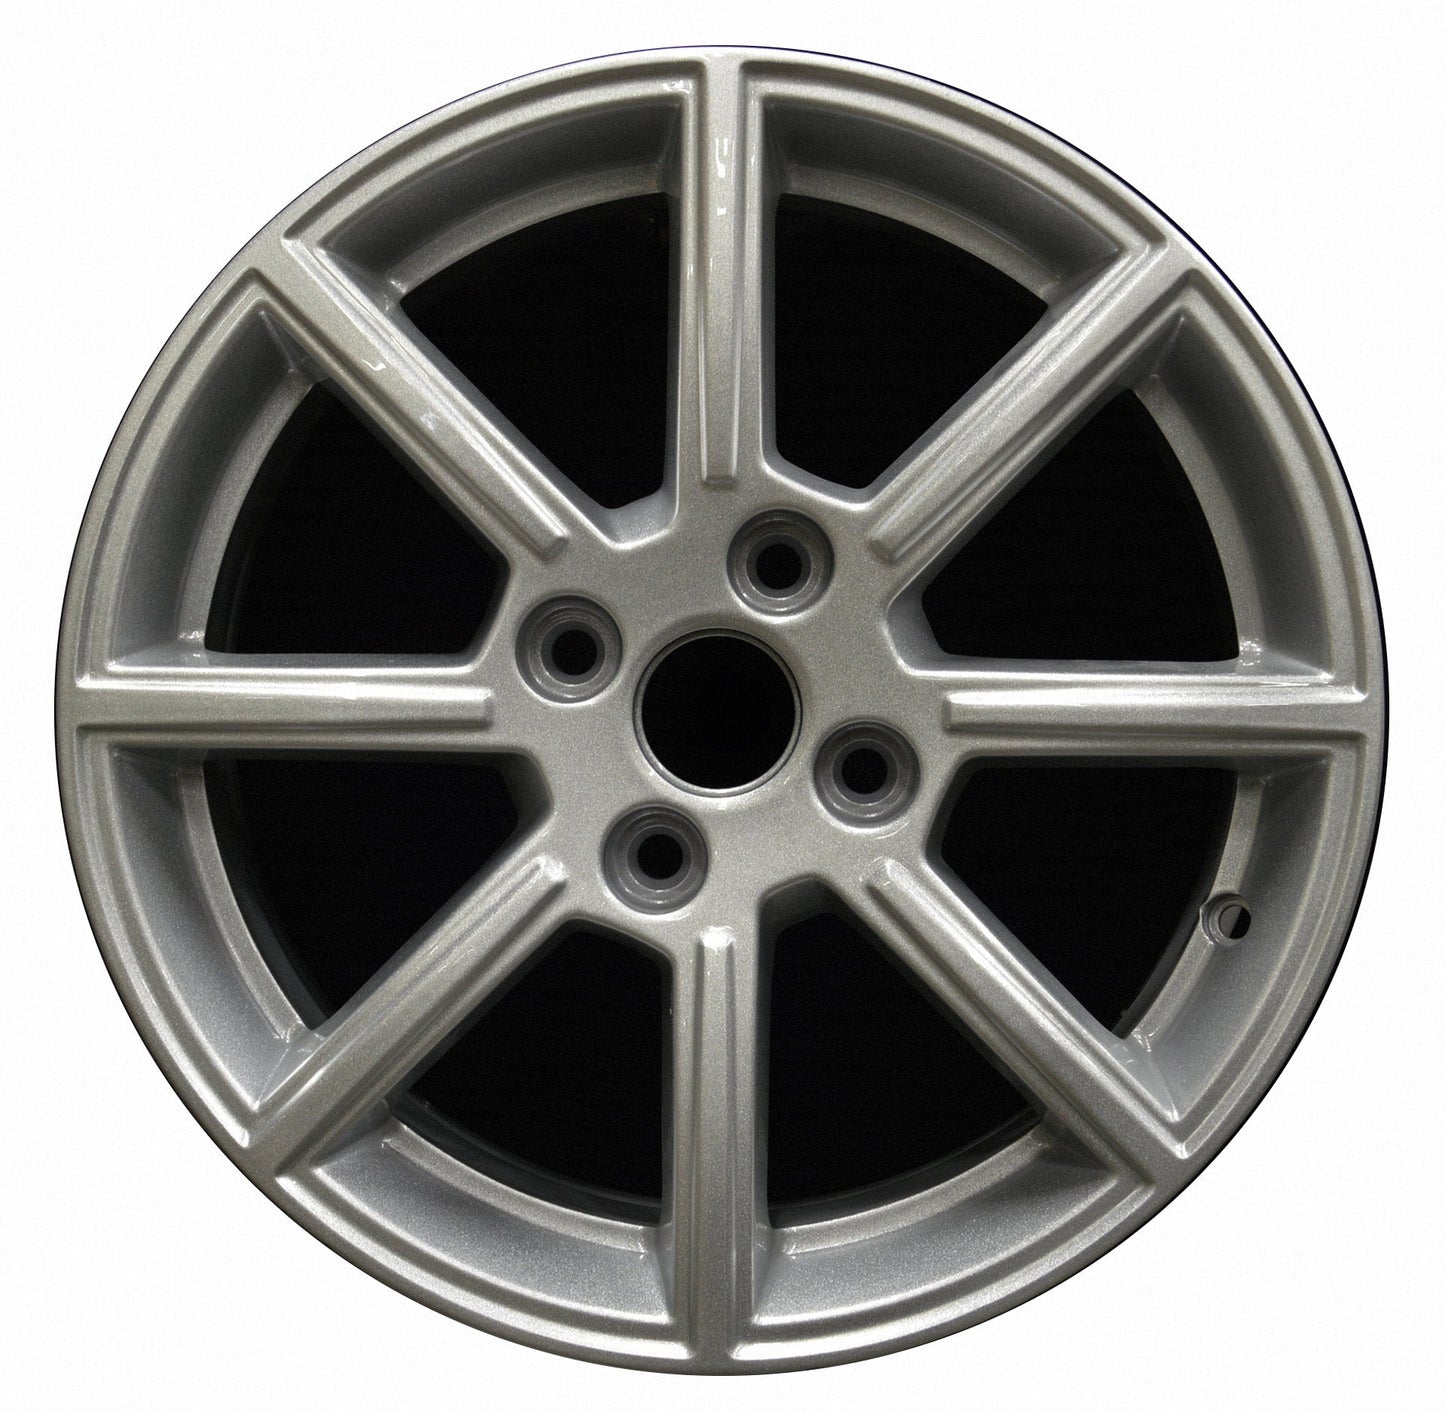 Ford Fiesta  2014, 2015, 2016, 2017, 2018, 2019 Factory OEM Car Wheel Size 16x6.5 Alloy WAO.10008.PS08.FF